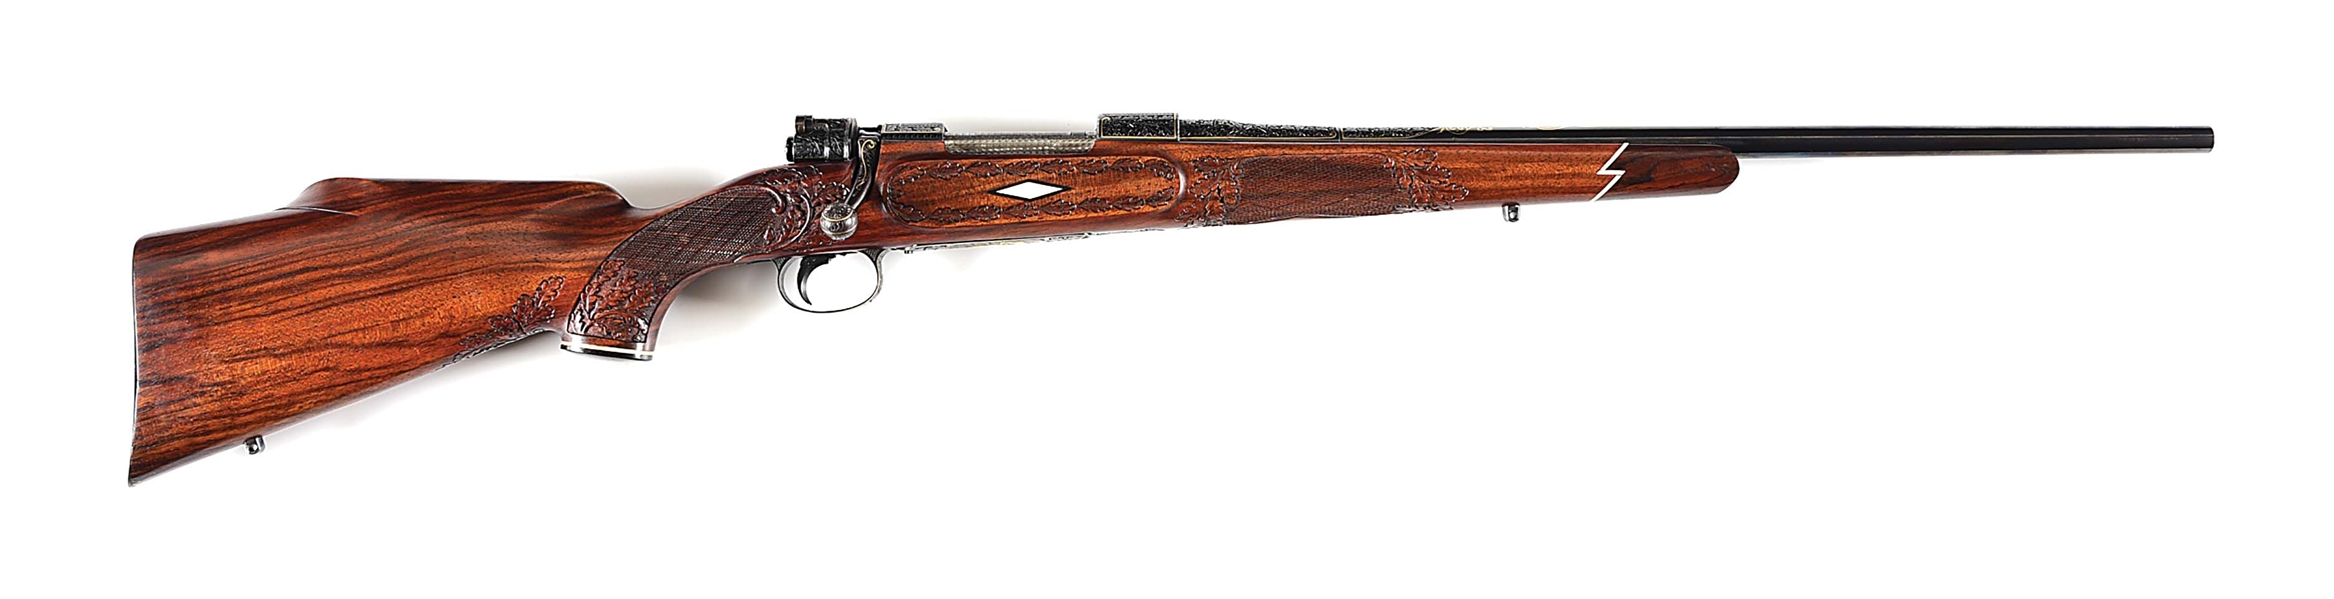 (C) ORNATE AND HIGHLY ATTRACTIVE KURT JAEGER MAUSER BOLT ACTION RIFLE IN .30-06 SPRINGFIELD.